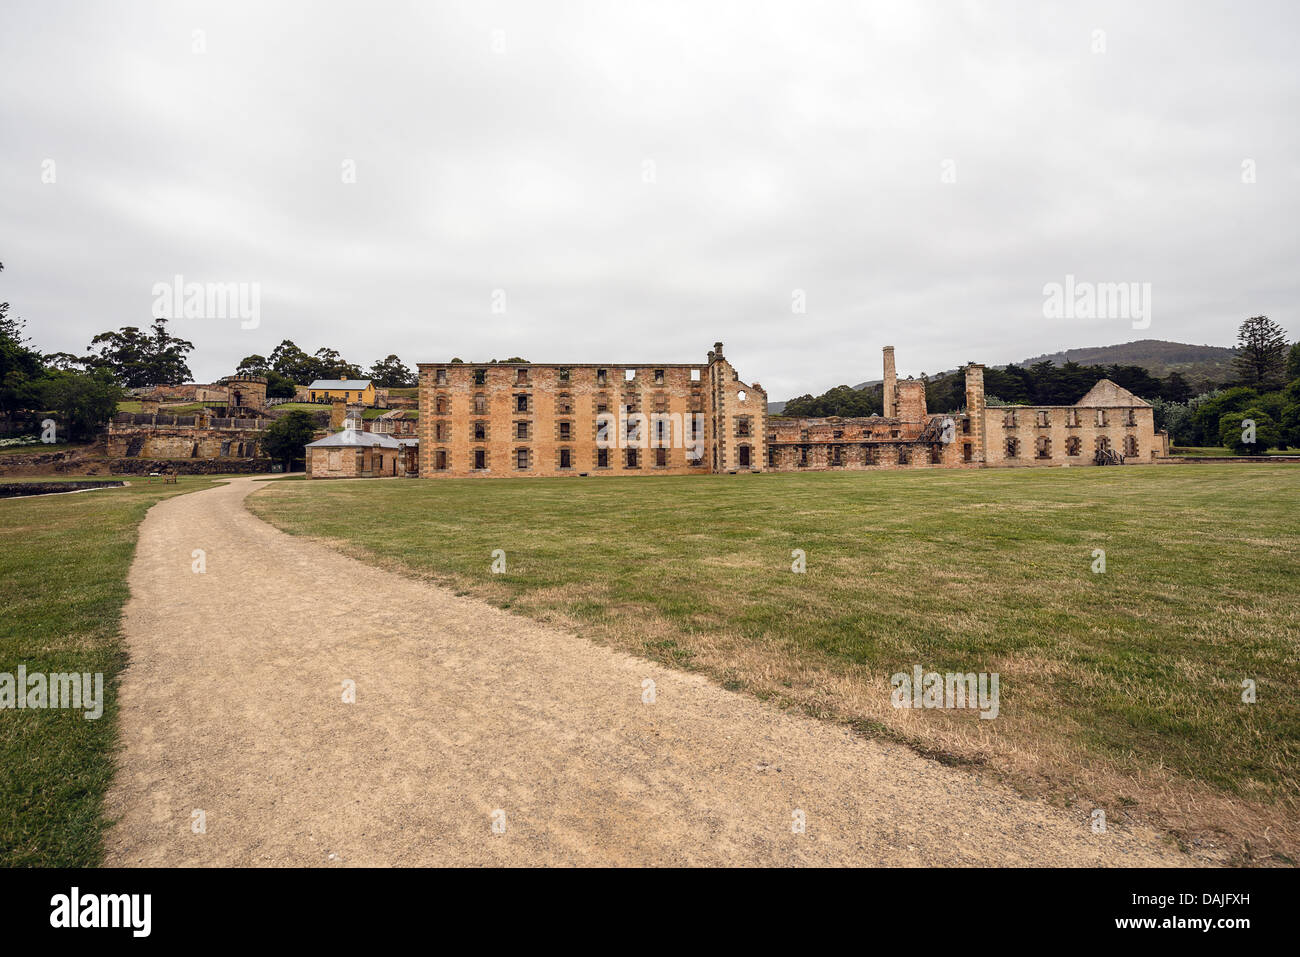 Building ruins at Port Arthur, Tasmania which was once a penal settlement in Australia's convict beginnings. Stock Photo